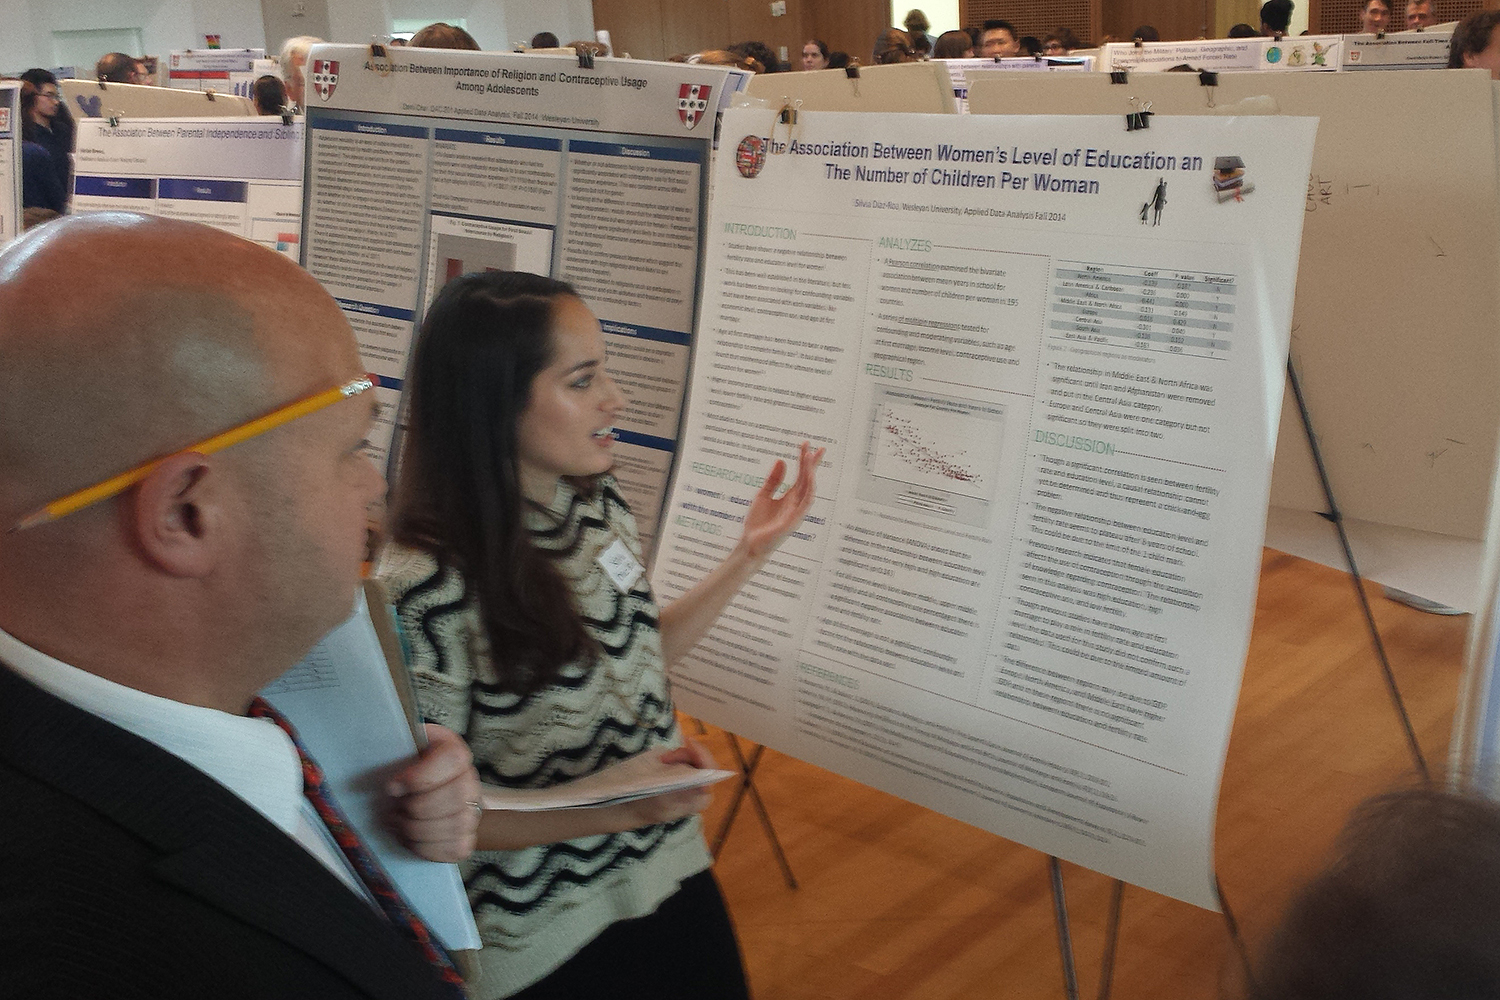 Silvia Diaz-Roa '15 presented her research at the poster session. 